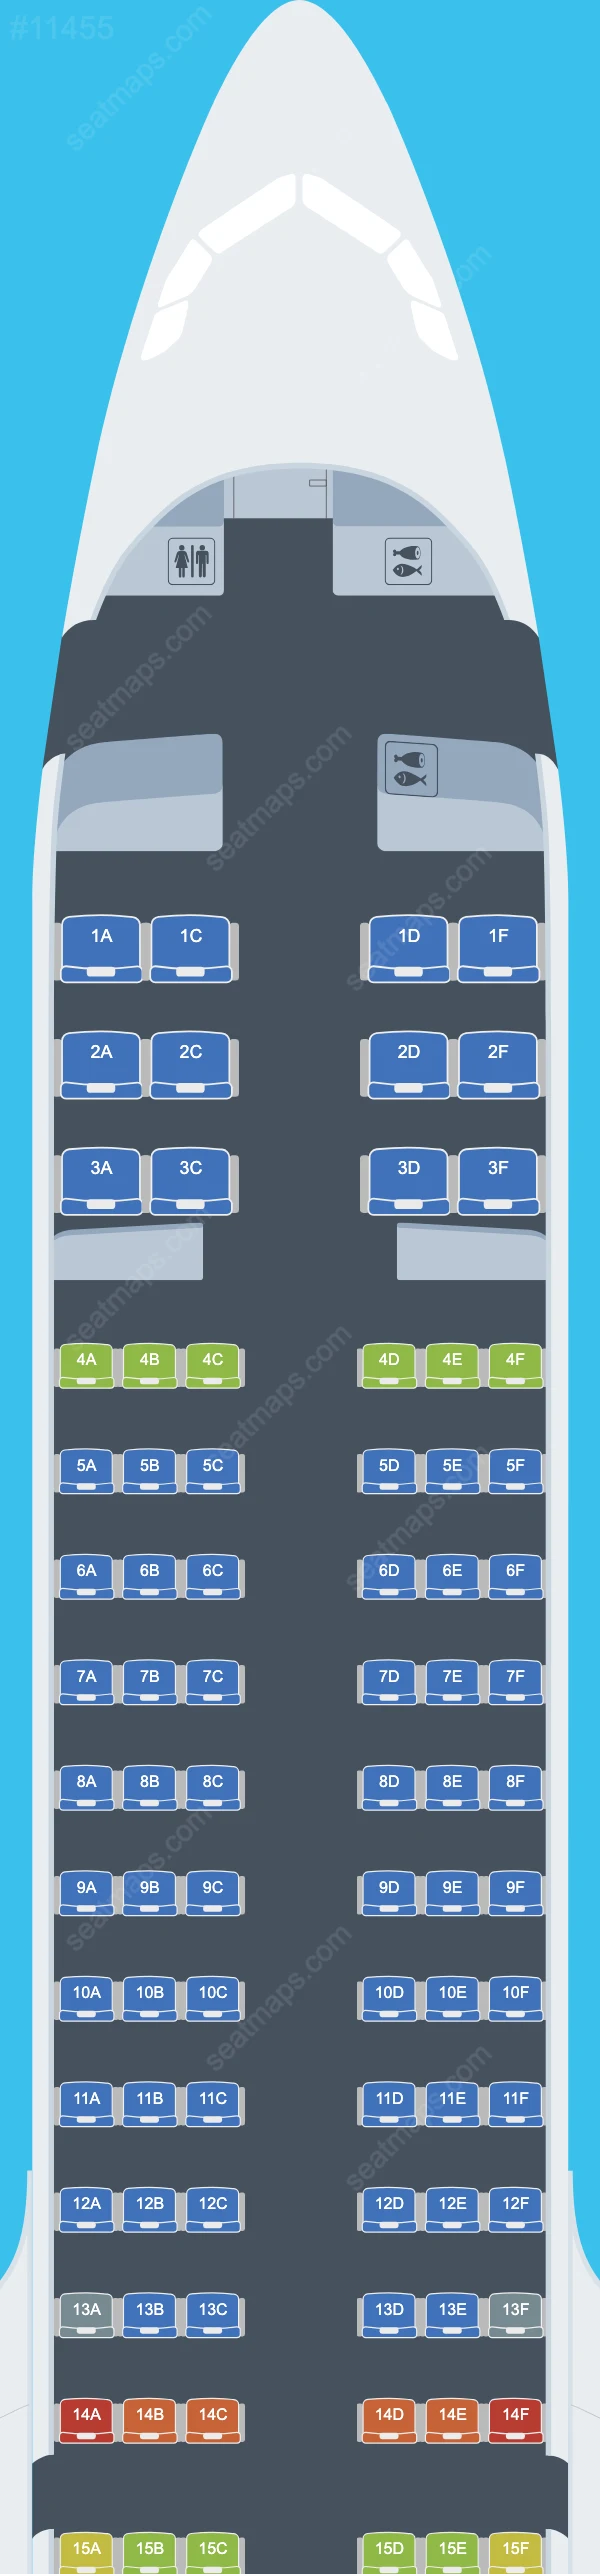 Qanot Sharq  Airlines Airbus A321-200neo seatmap preview